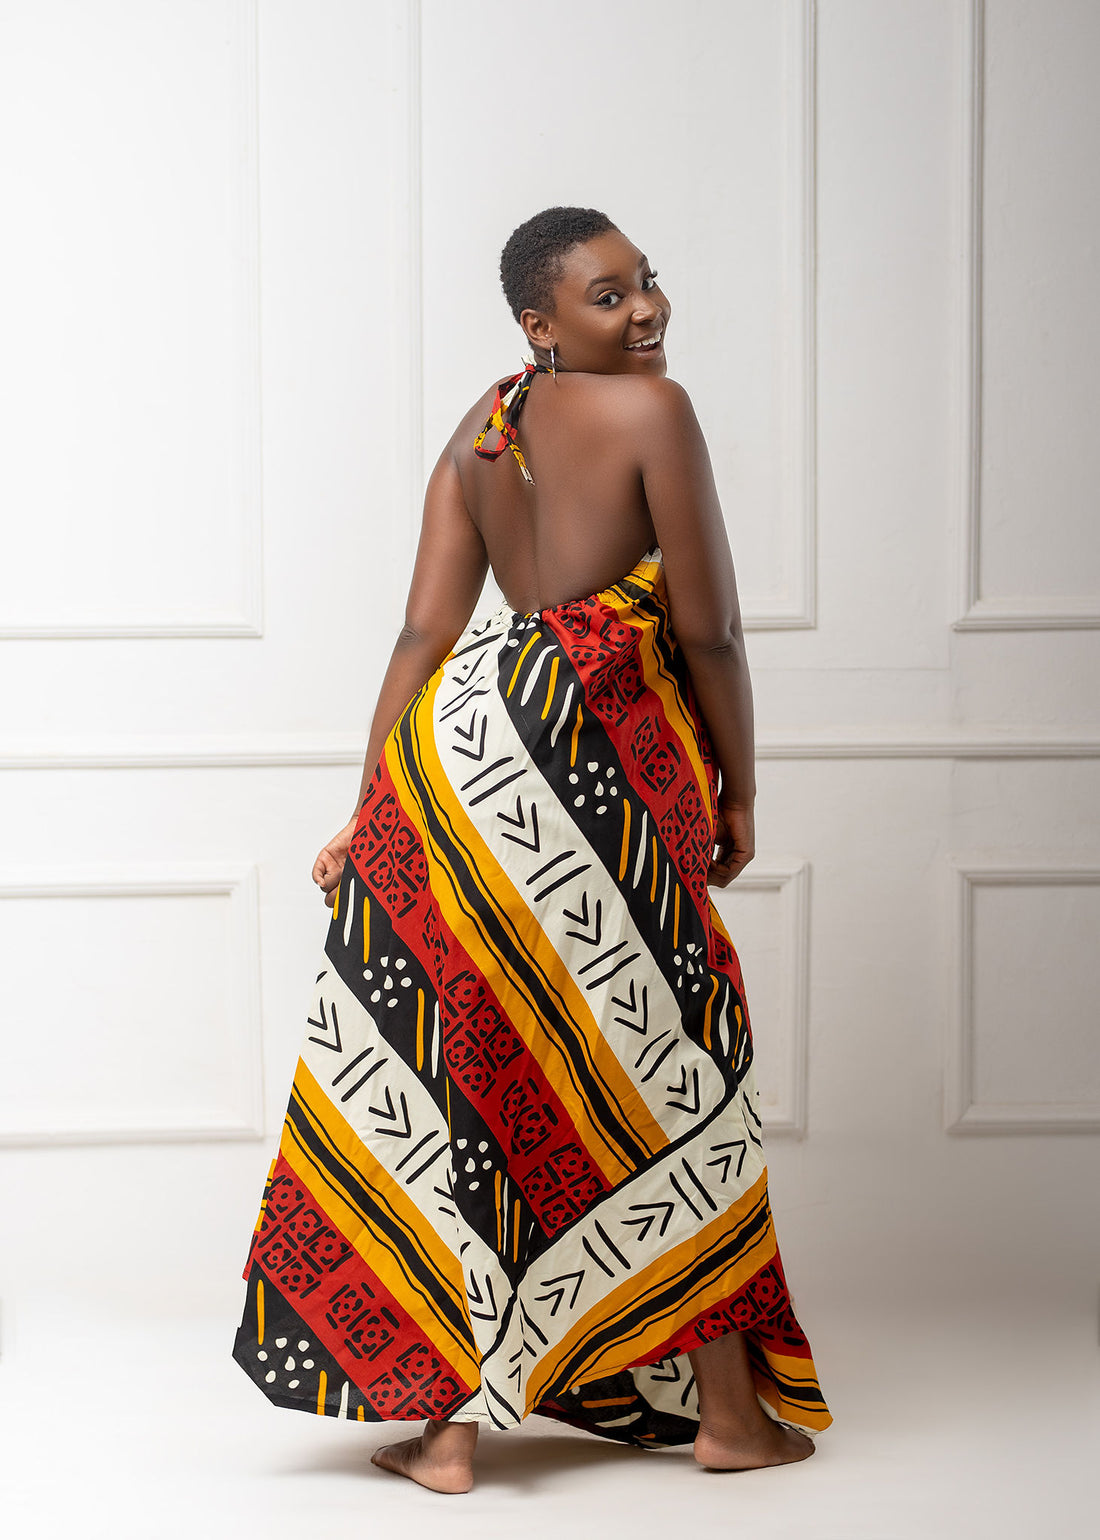 Get To Know Anna J - Your Modern African Clothing Designer